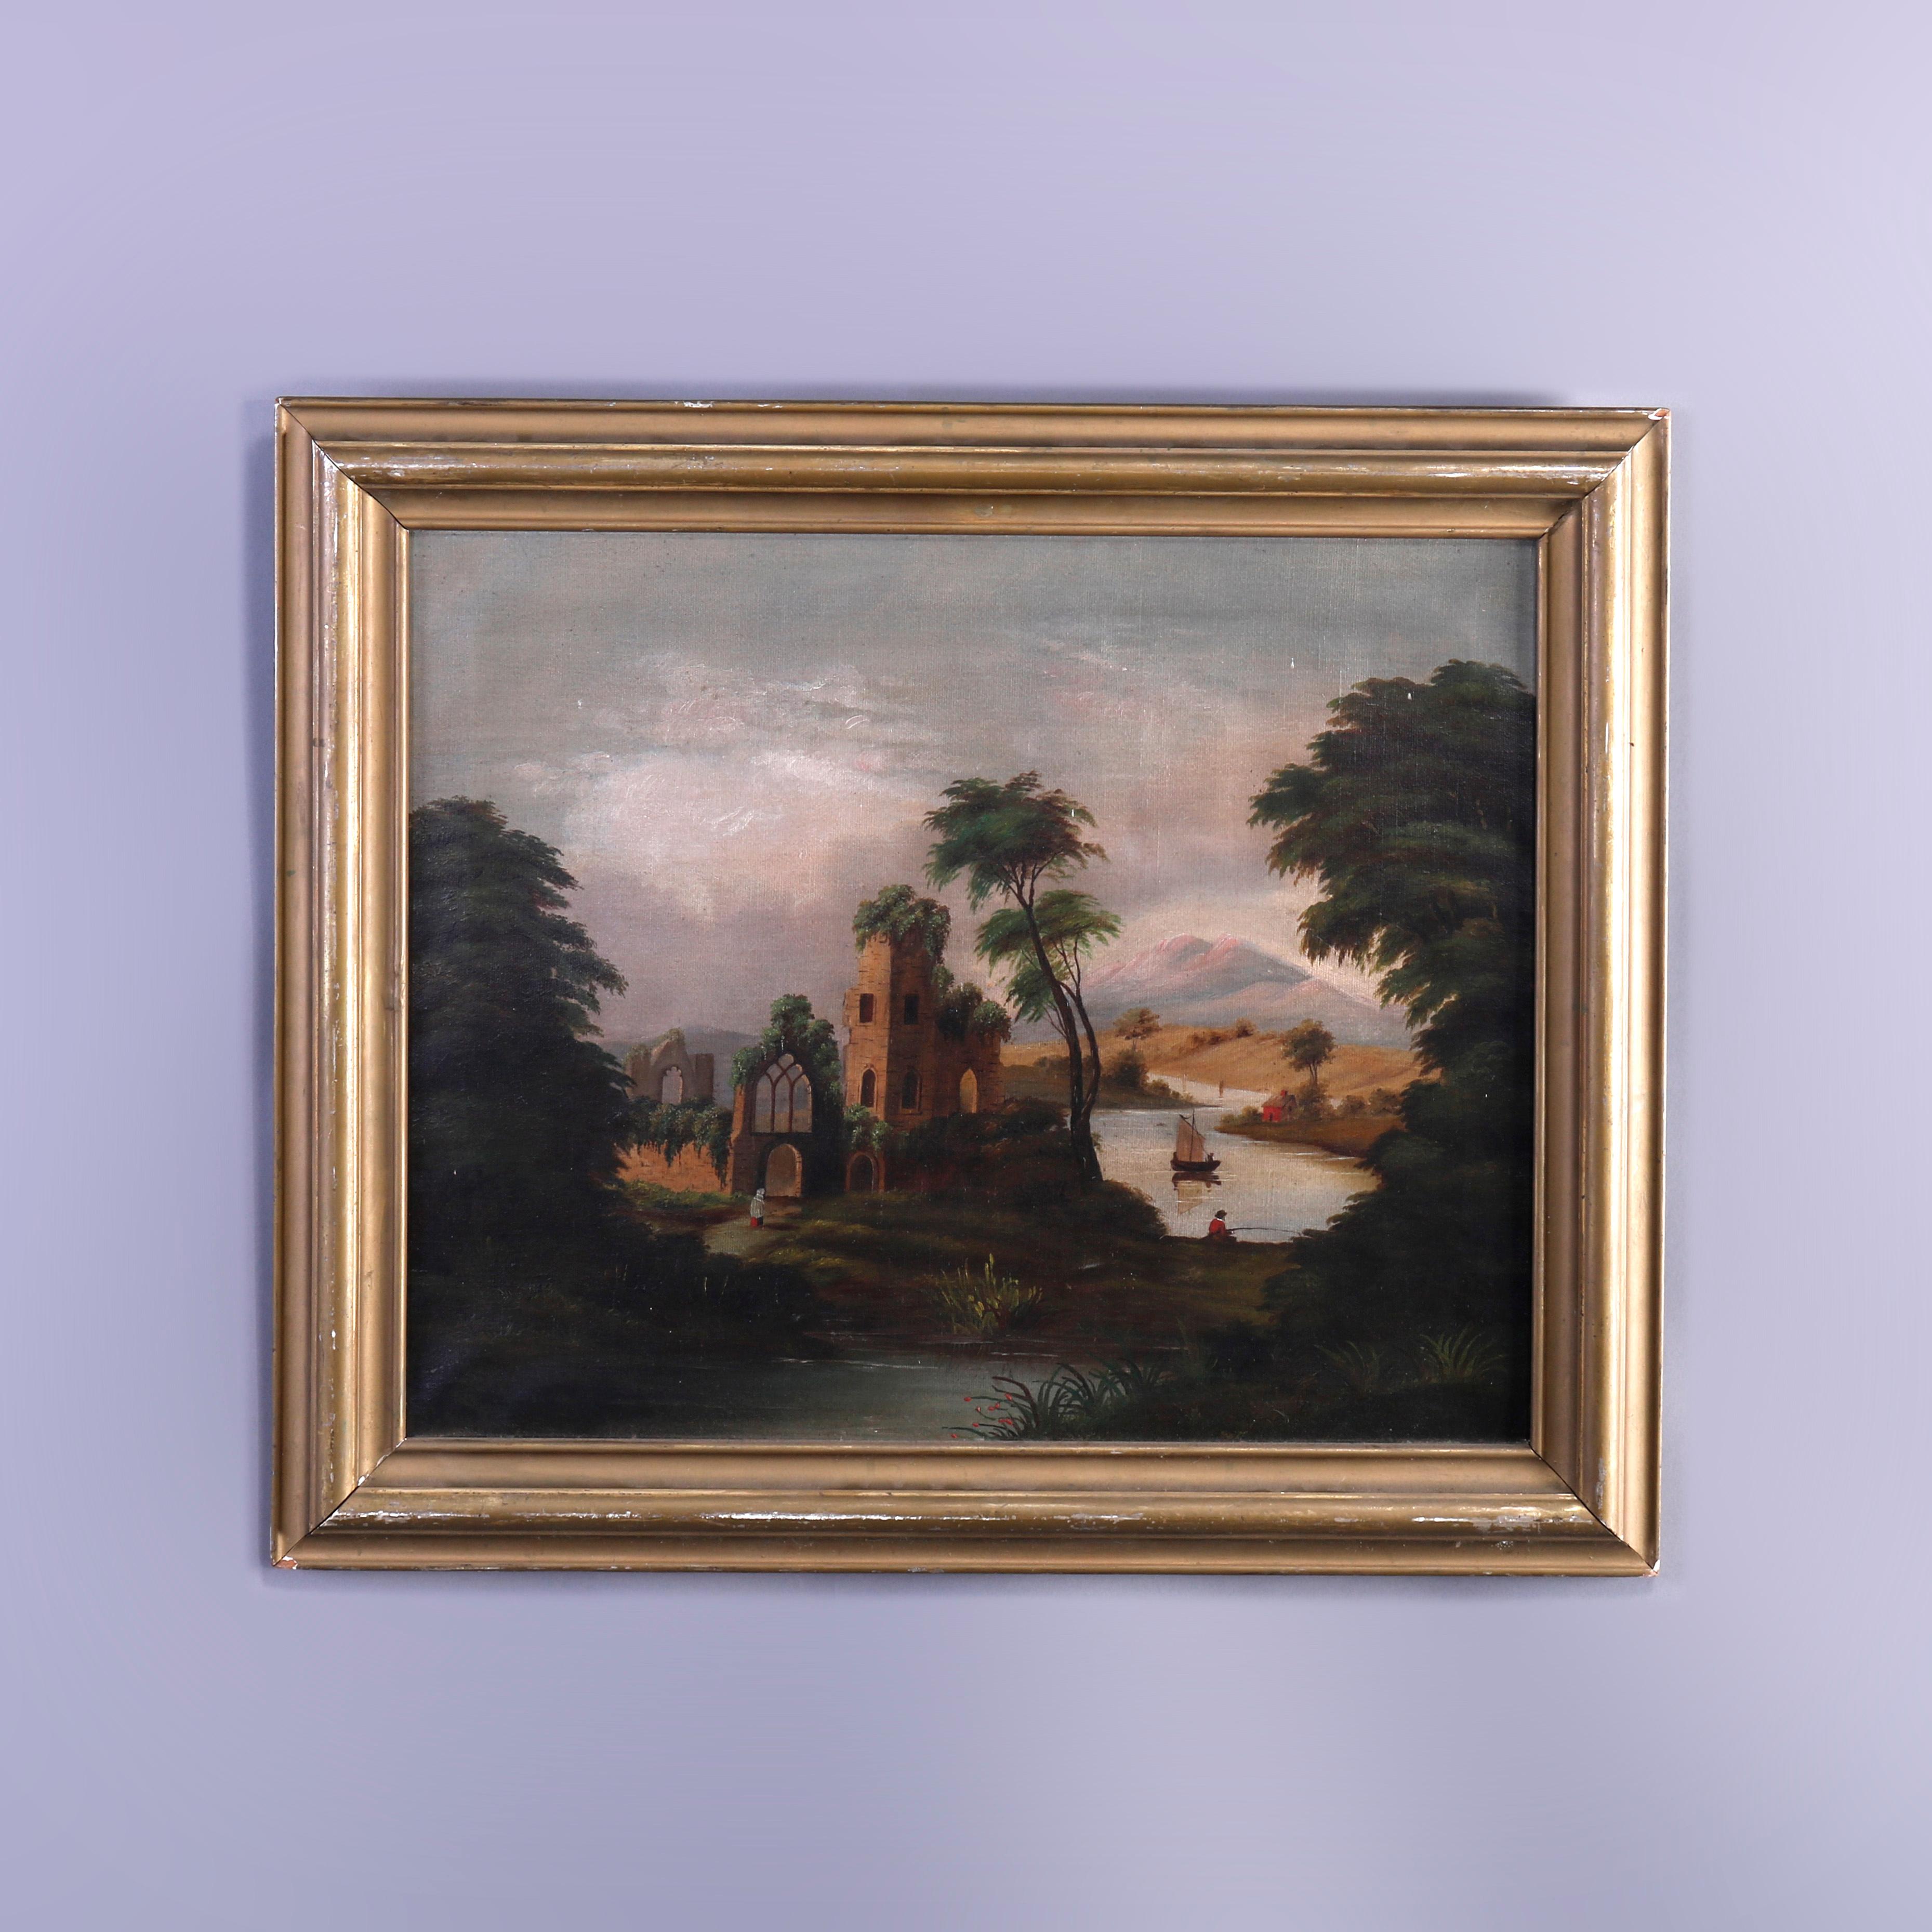 An antique painting in the manner of Thomas Chambers offers folk art oil on canvas of the ruins of a Catholic church cathedral on a lake with boats and figures, seated in giltwood frame, c1820

Measures - overall 25'' H x 29.25'' W x 2'' D; sight